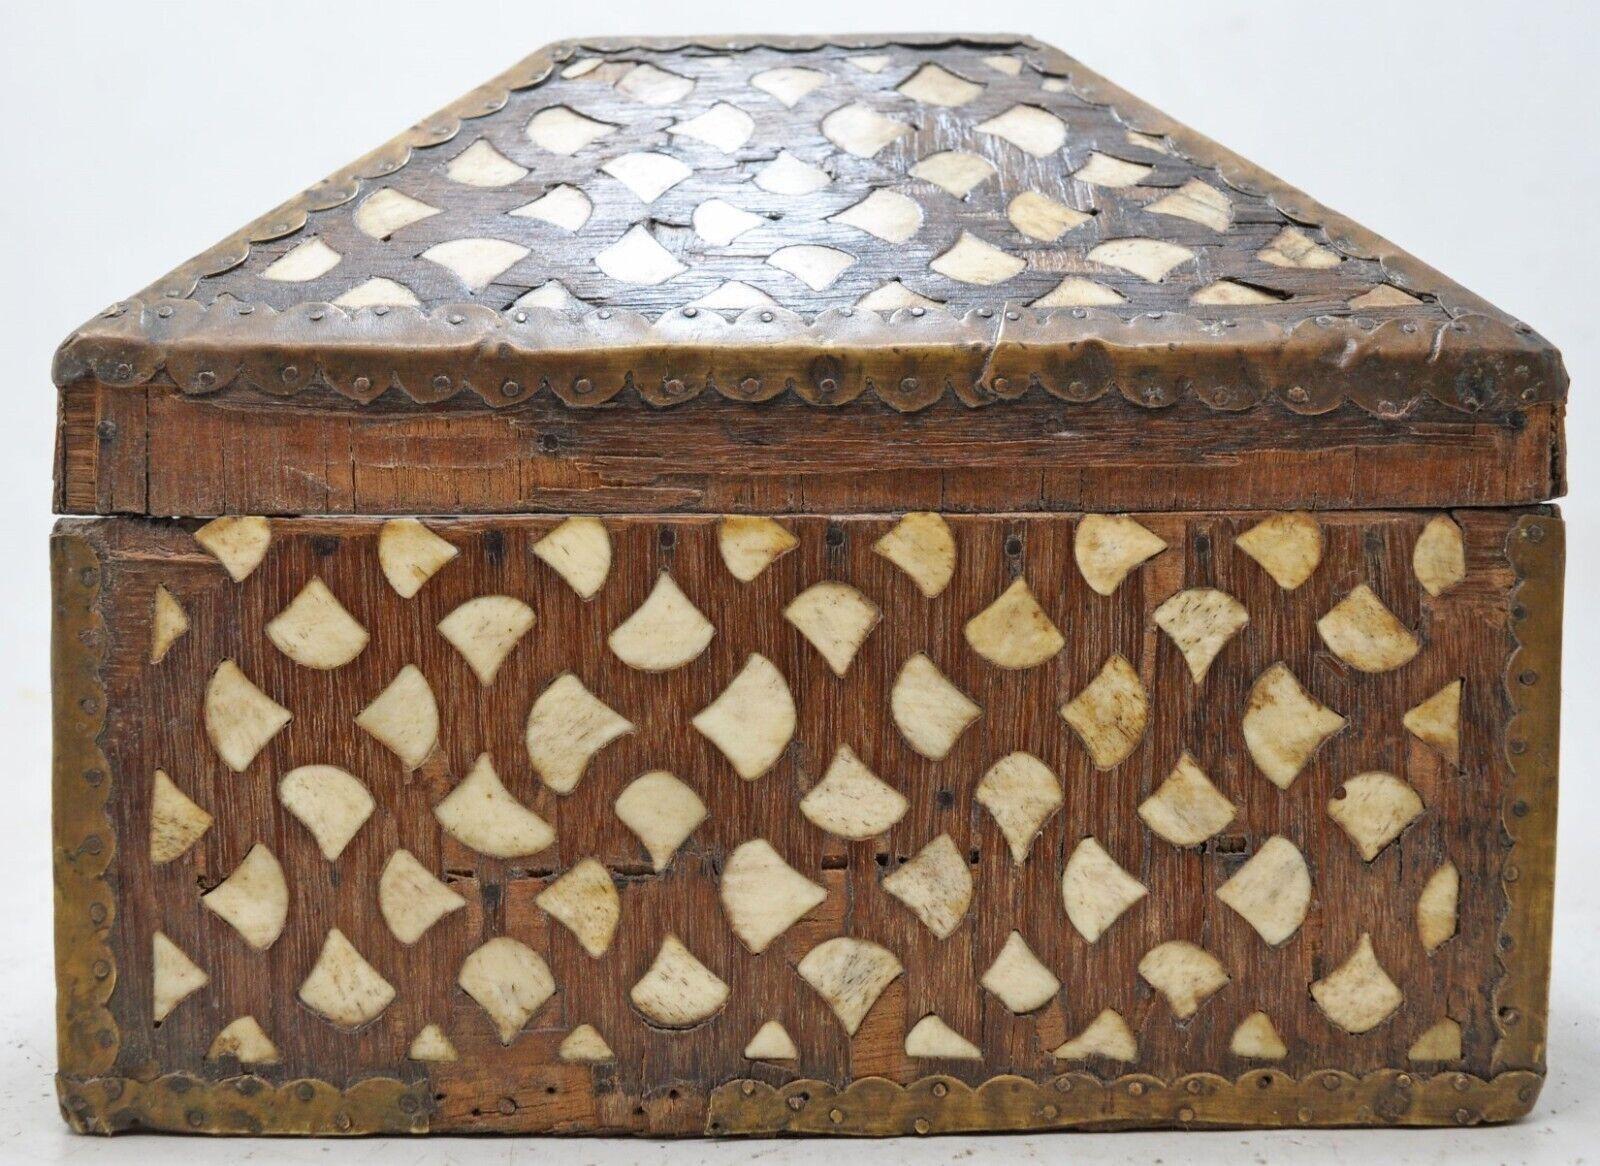 Dutch Colonial Antique Hand-Crafted Decorative Box with Distinctive Bone Inlay Pattern  For Sale